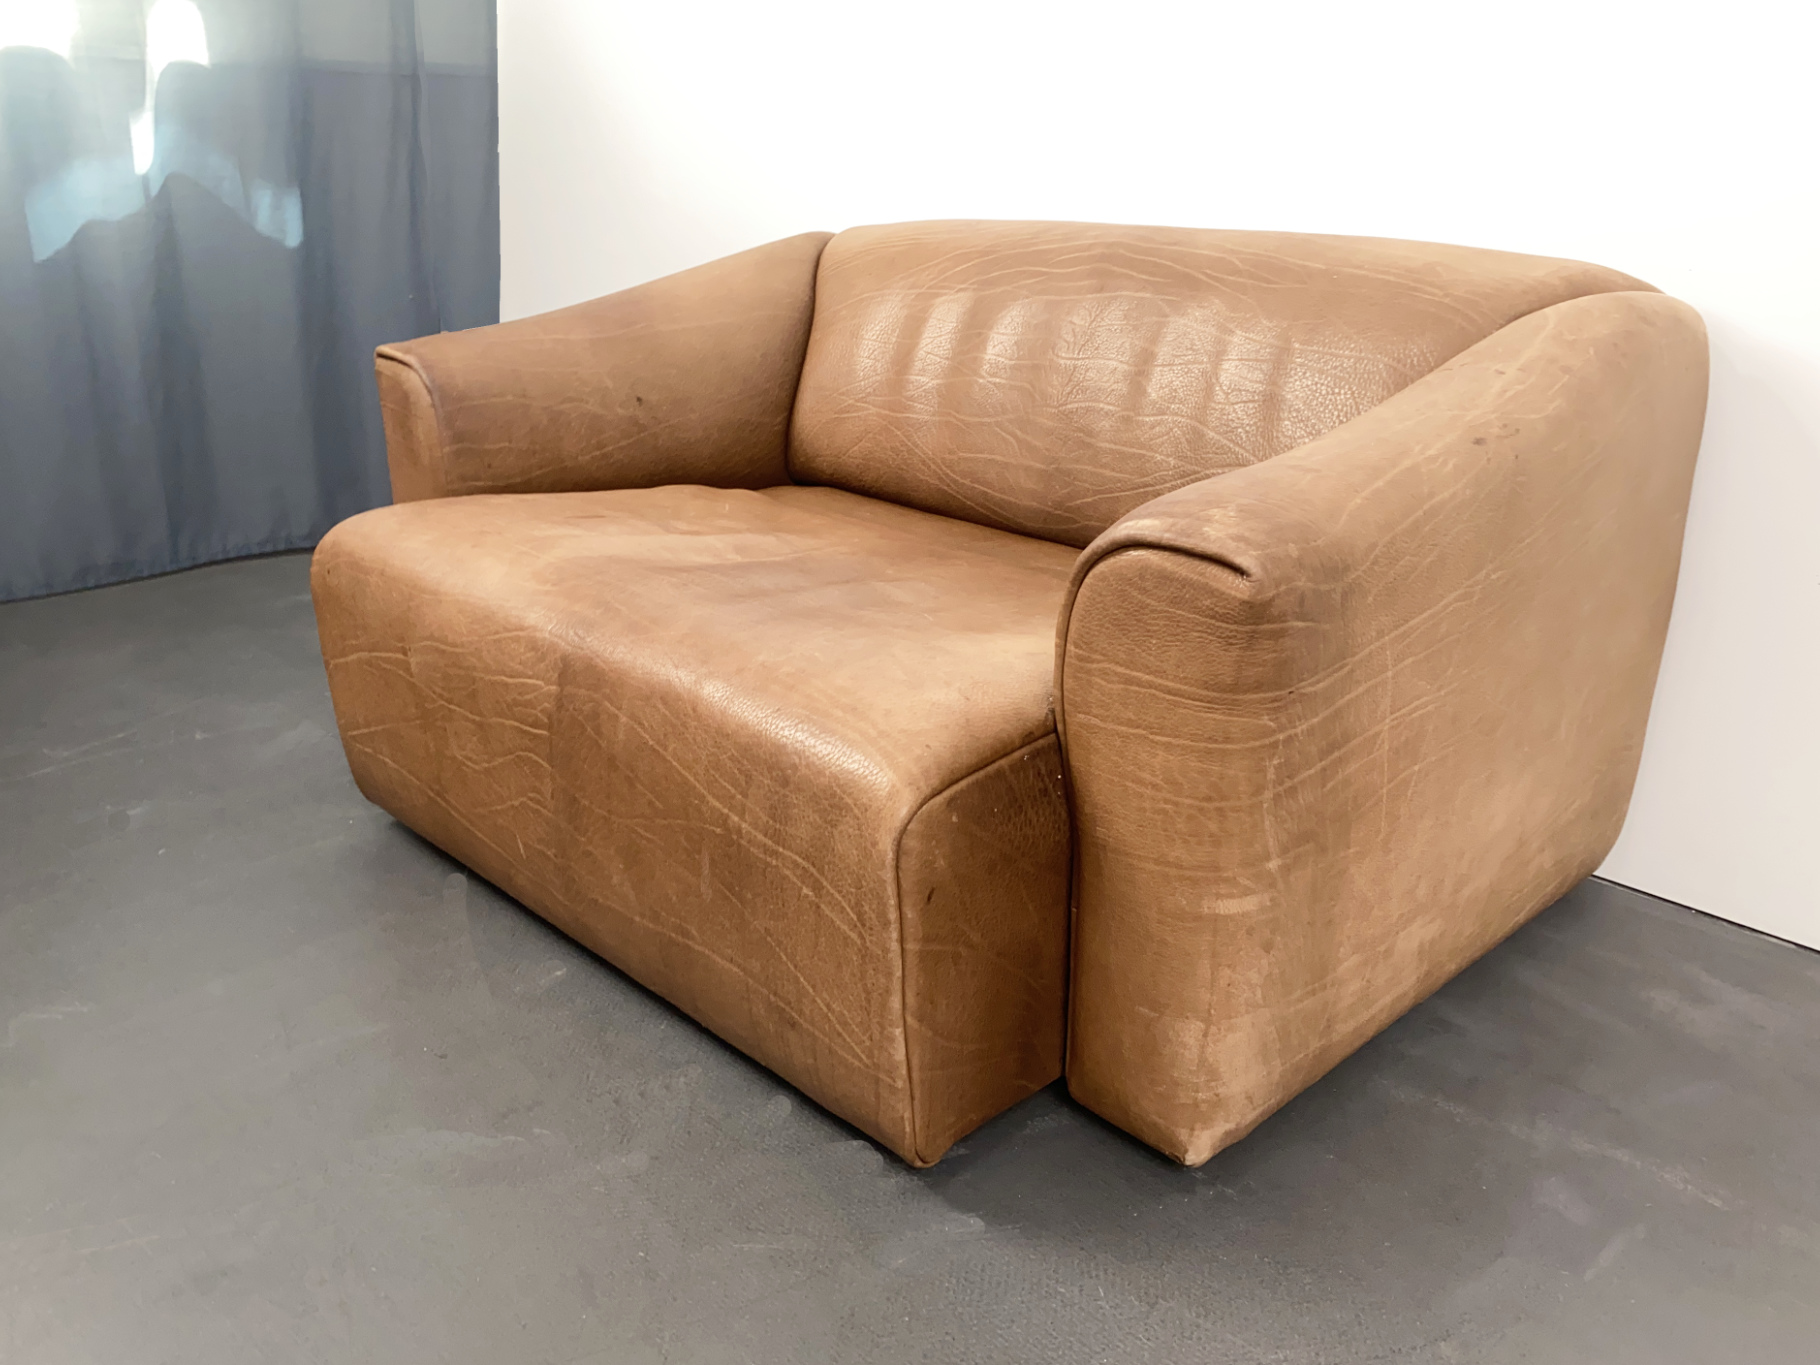 Leather Sofa DS-47, cognac, 2-Seater Couch by de Sede, Switzerland, 1970s